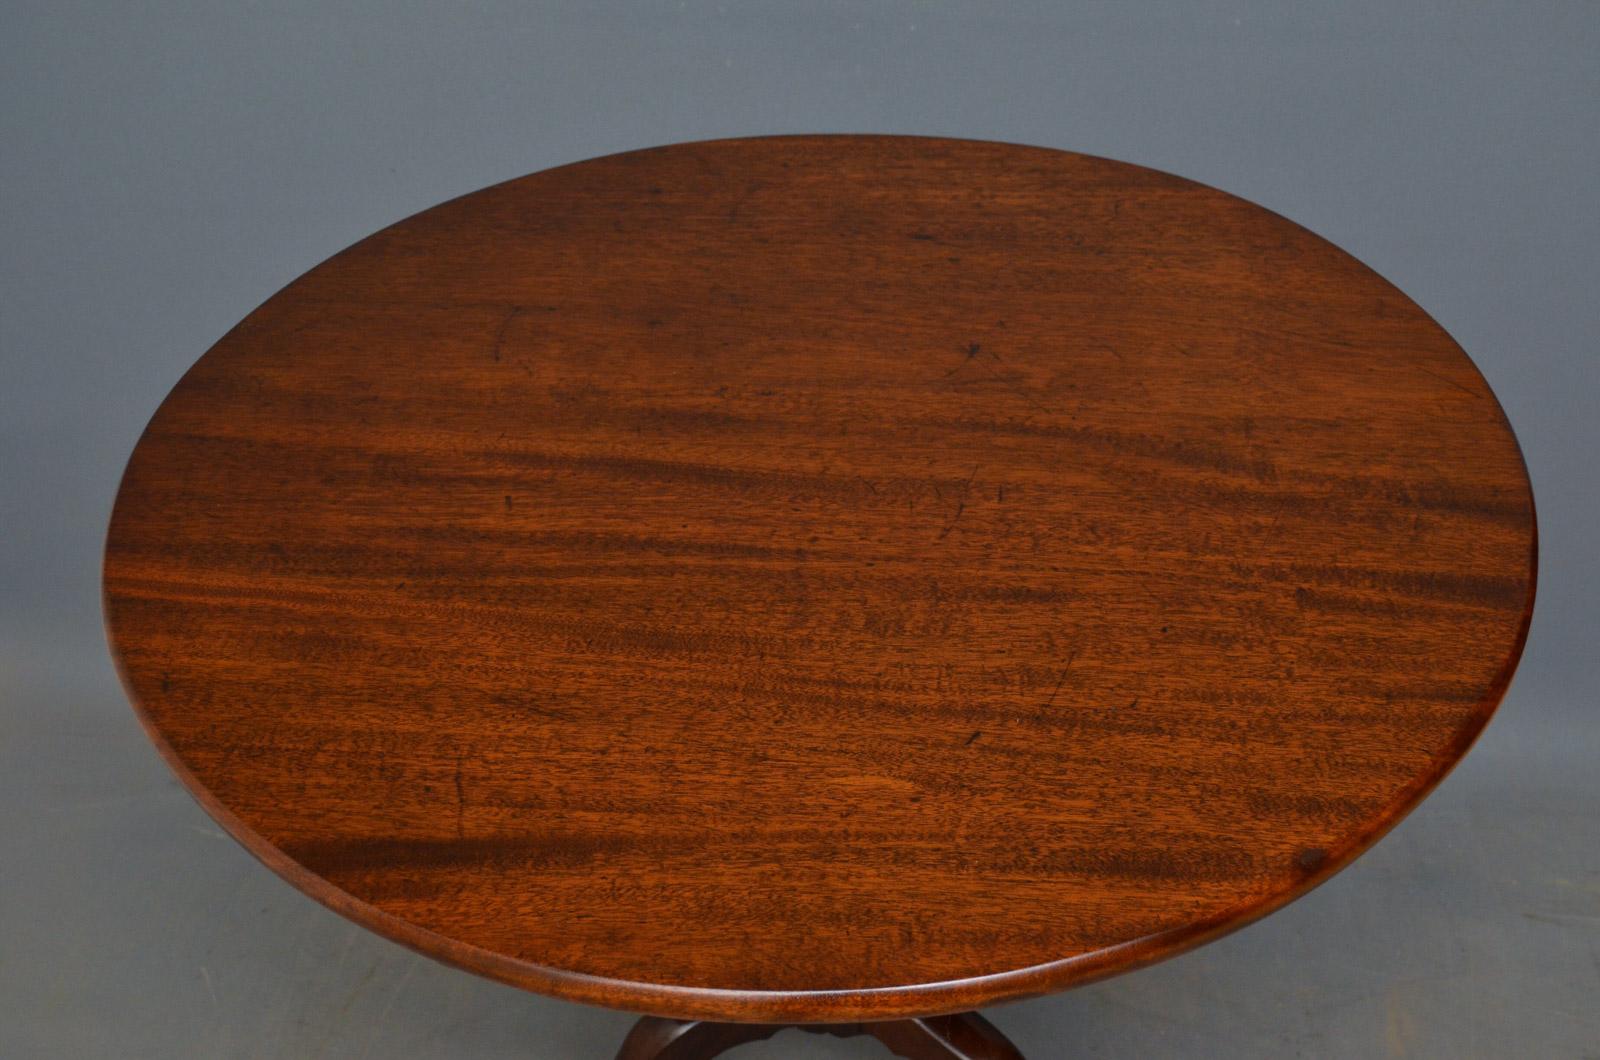 Sn579 Georgian, mahogany, pedestal table, having tilt single piece circular top with original catch and simple turned pedestal terminating in three downswept legs with pad feet. This antique table has been sympathetically restored and is ready to